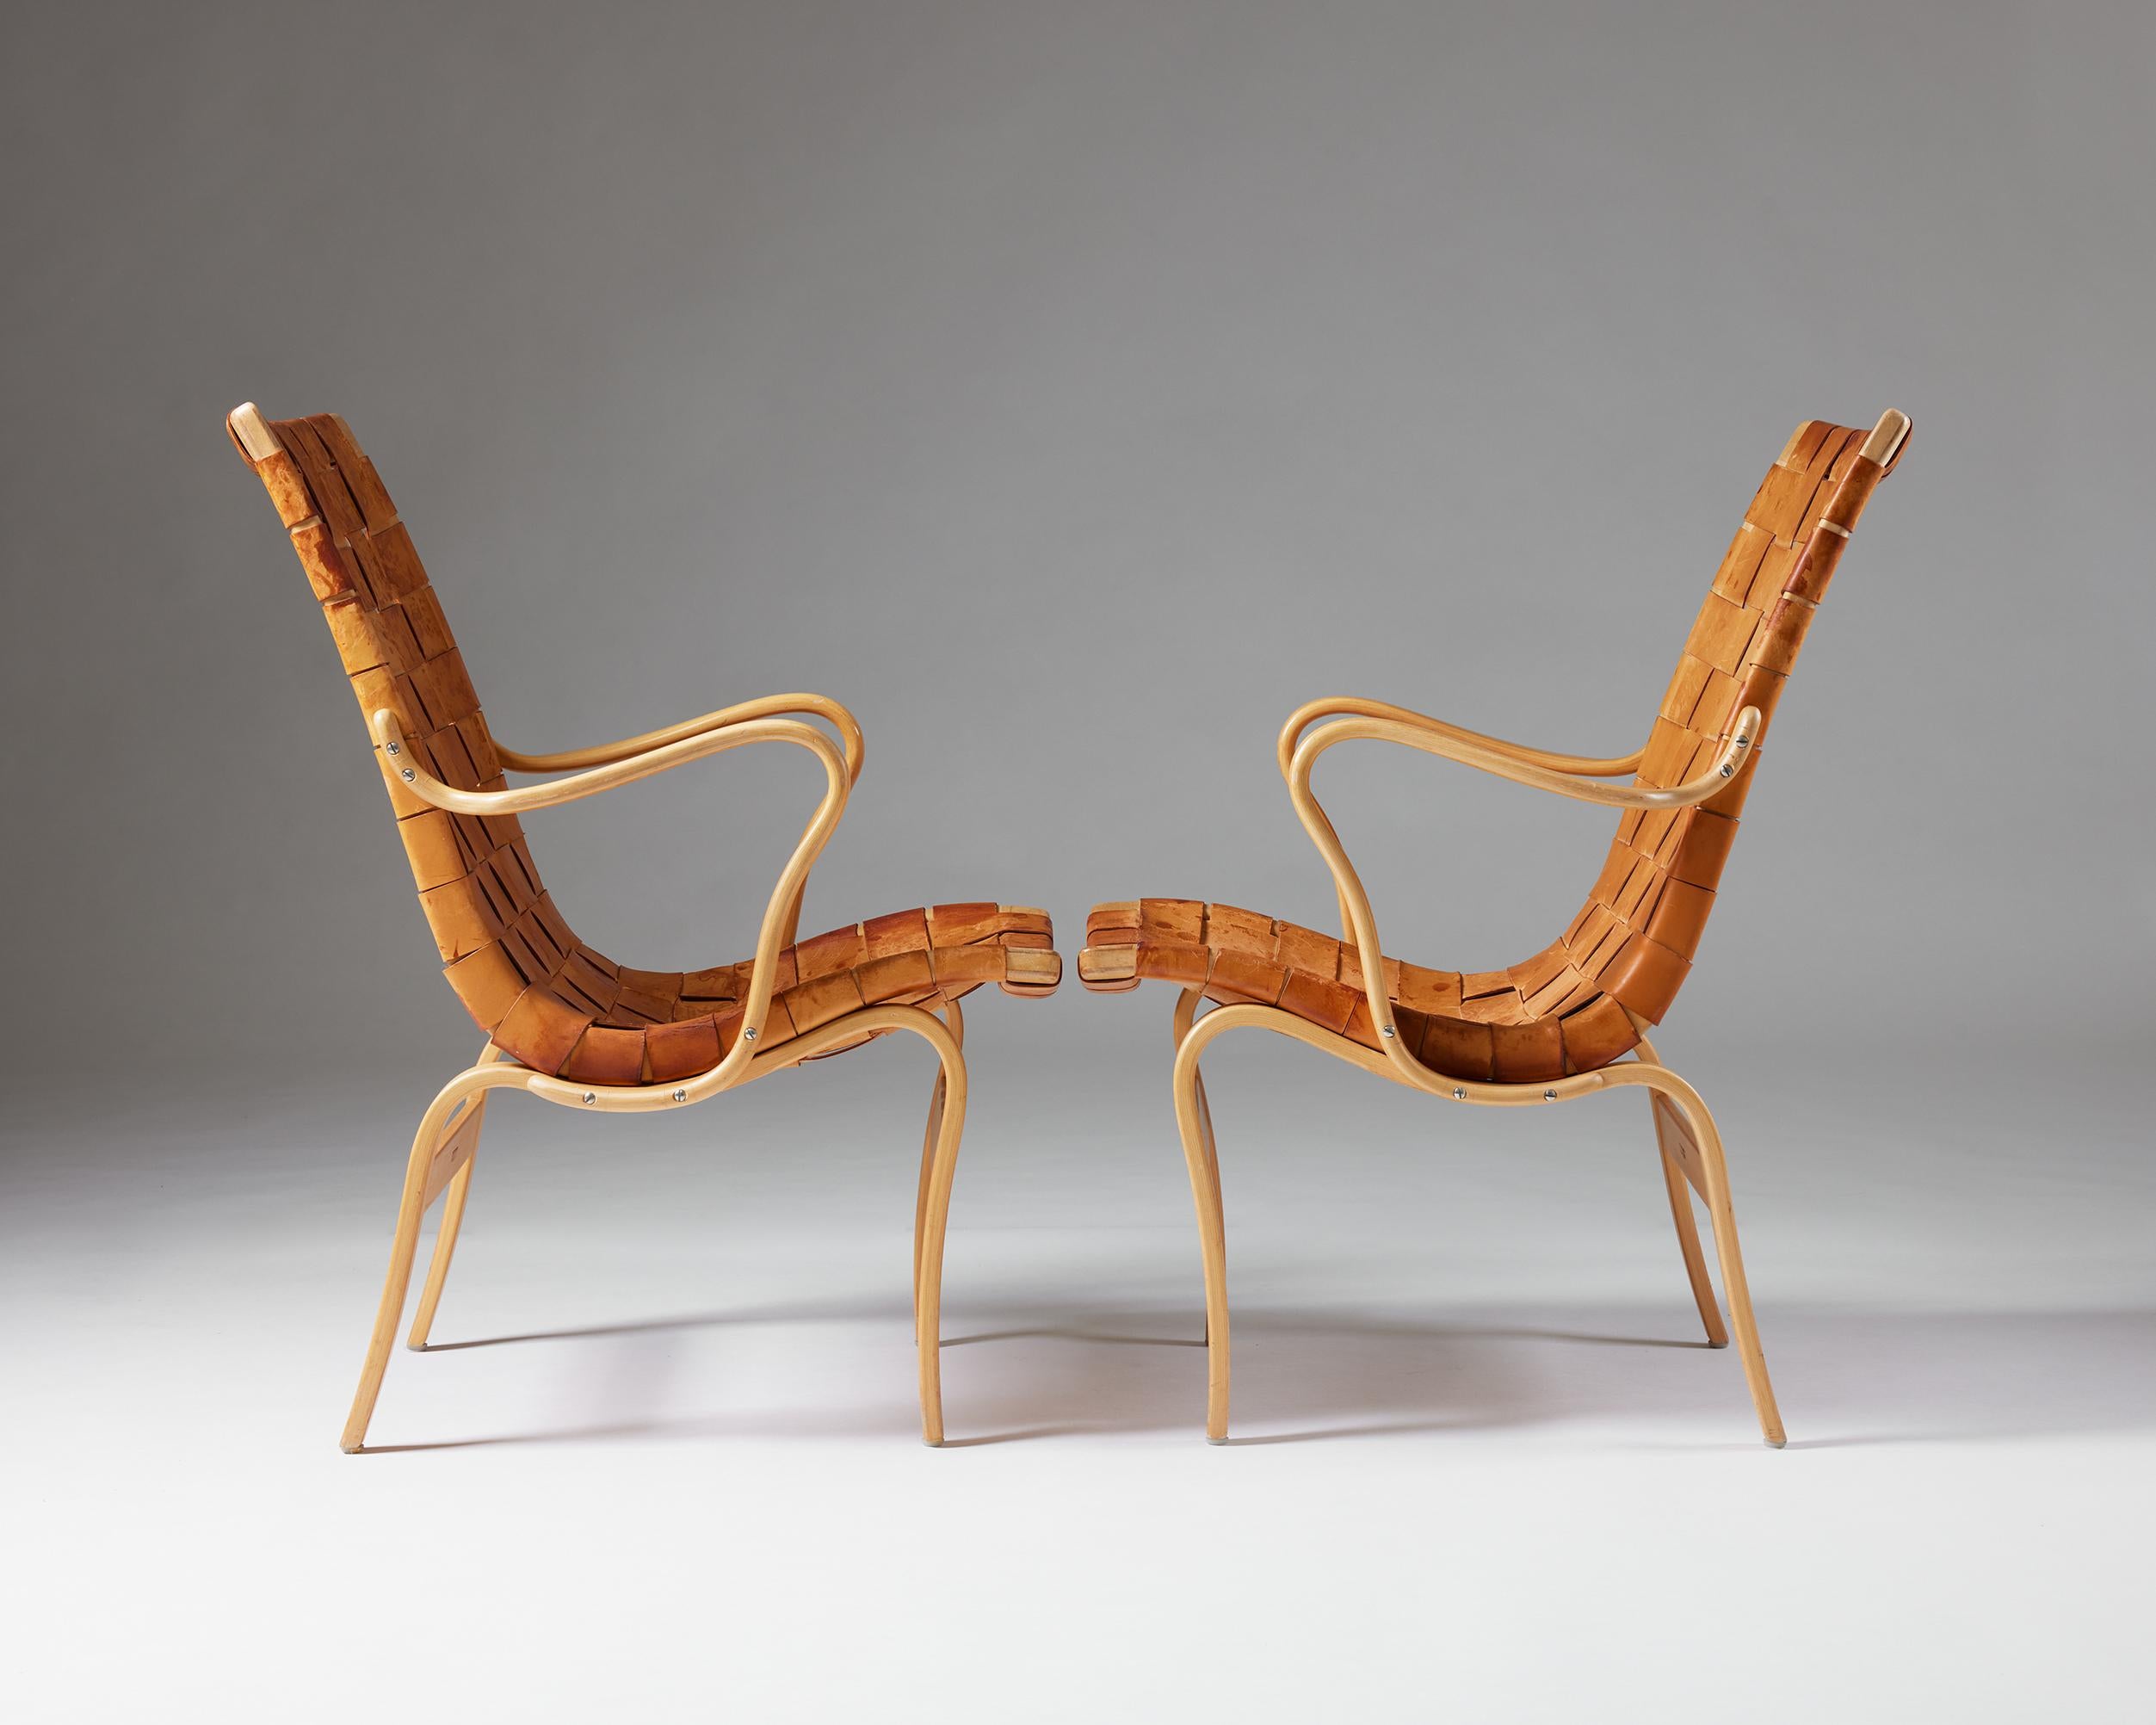 Pair of armchairs ‘Eva’ designed by Bruno Mathsson for Karl Mathsson, Swedish For Sale 1